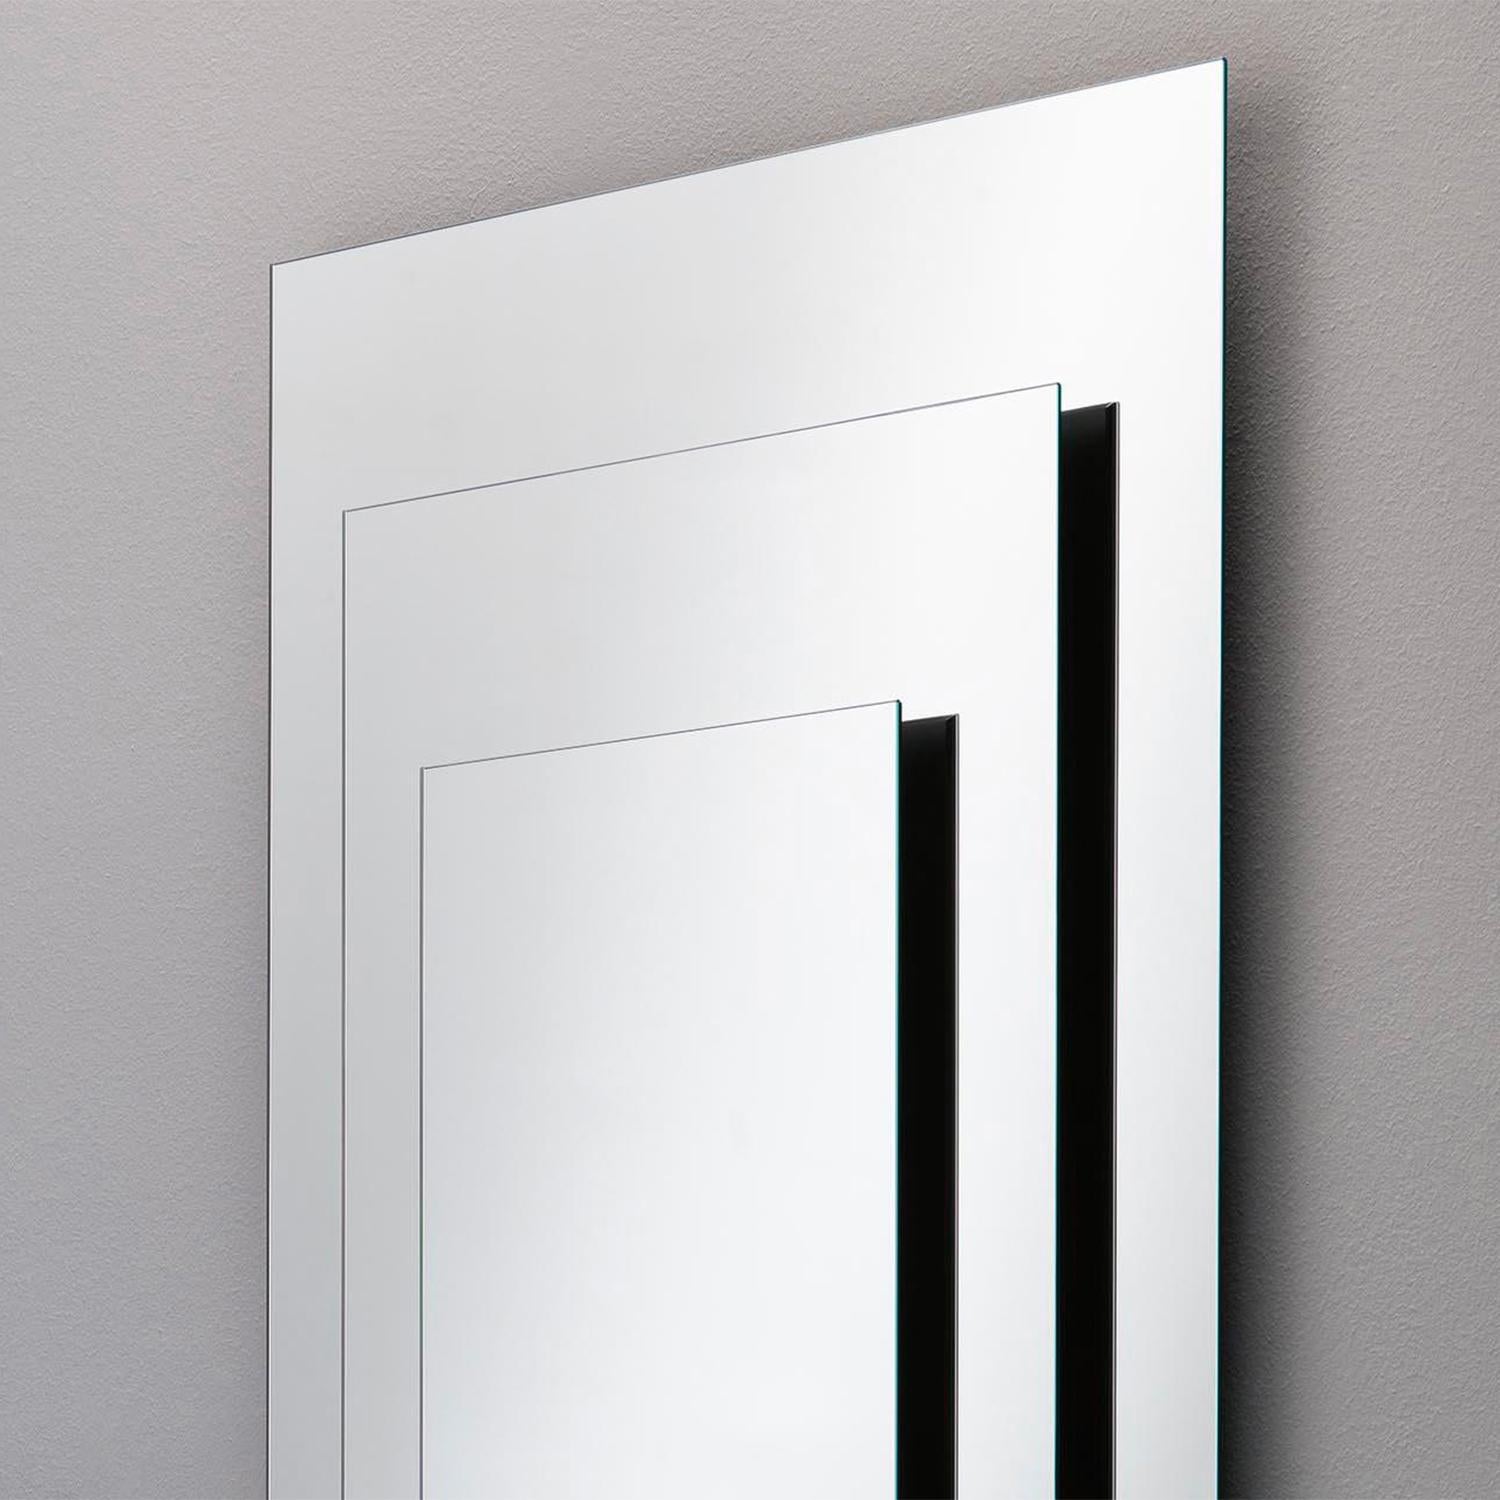 Mirror Pass Glass all in mirror glass and with wooden
structure in black finish between each mirrors panels.
Also available with back mirrored led light system, 
price: 5800,00€ on request.